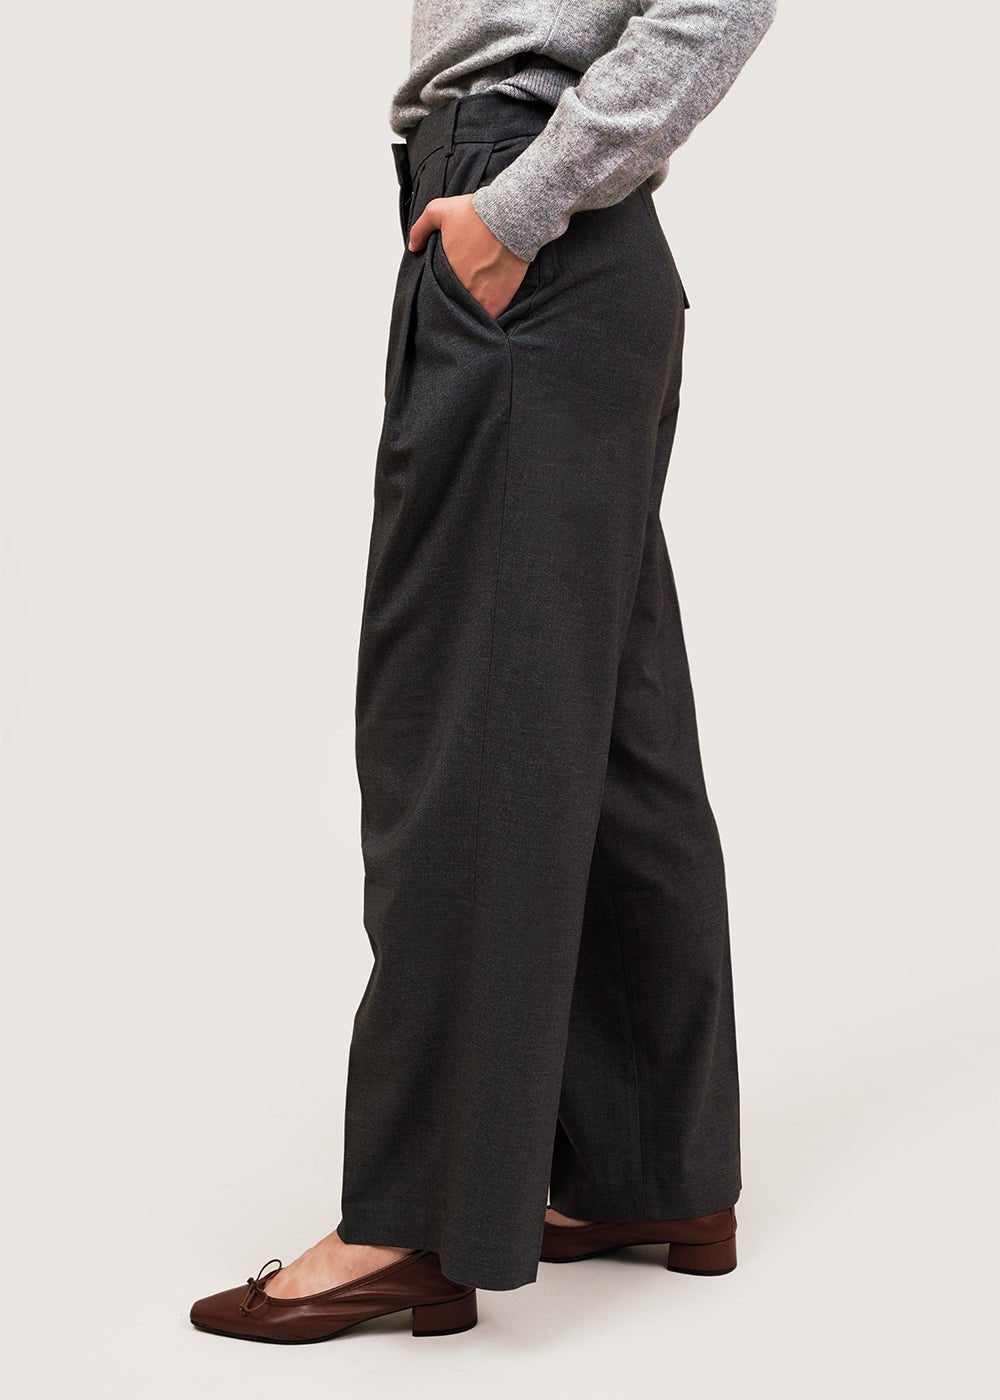 Pleat Front Wide Leg Pants in Charcoal by MIJEONG PARK – New 